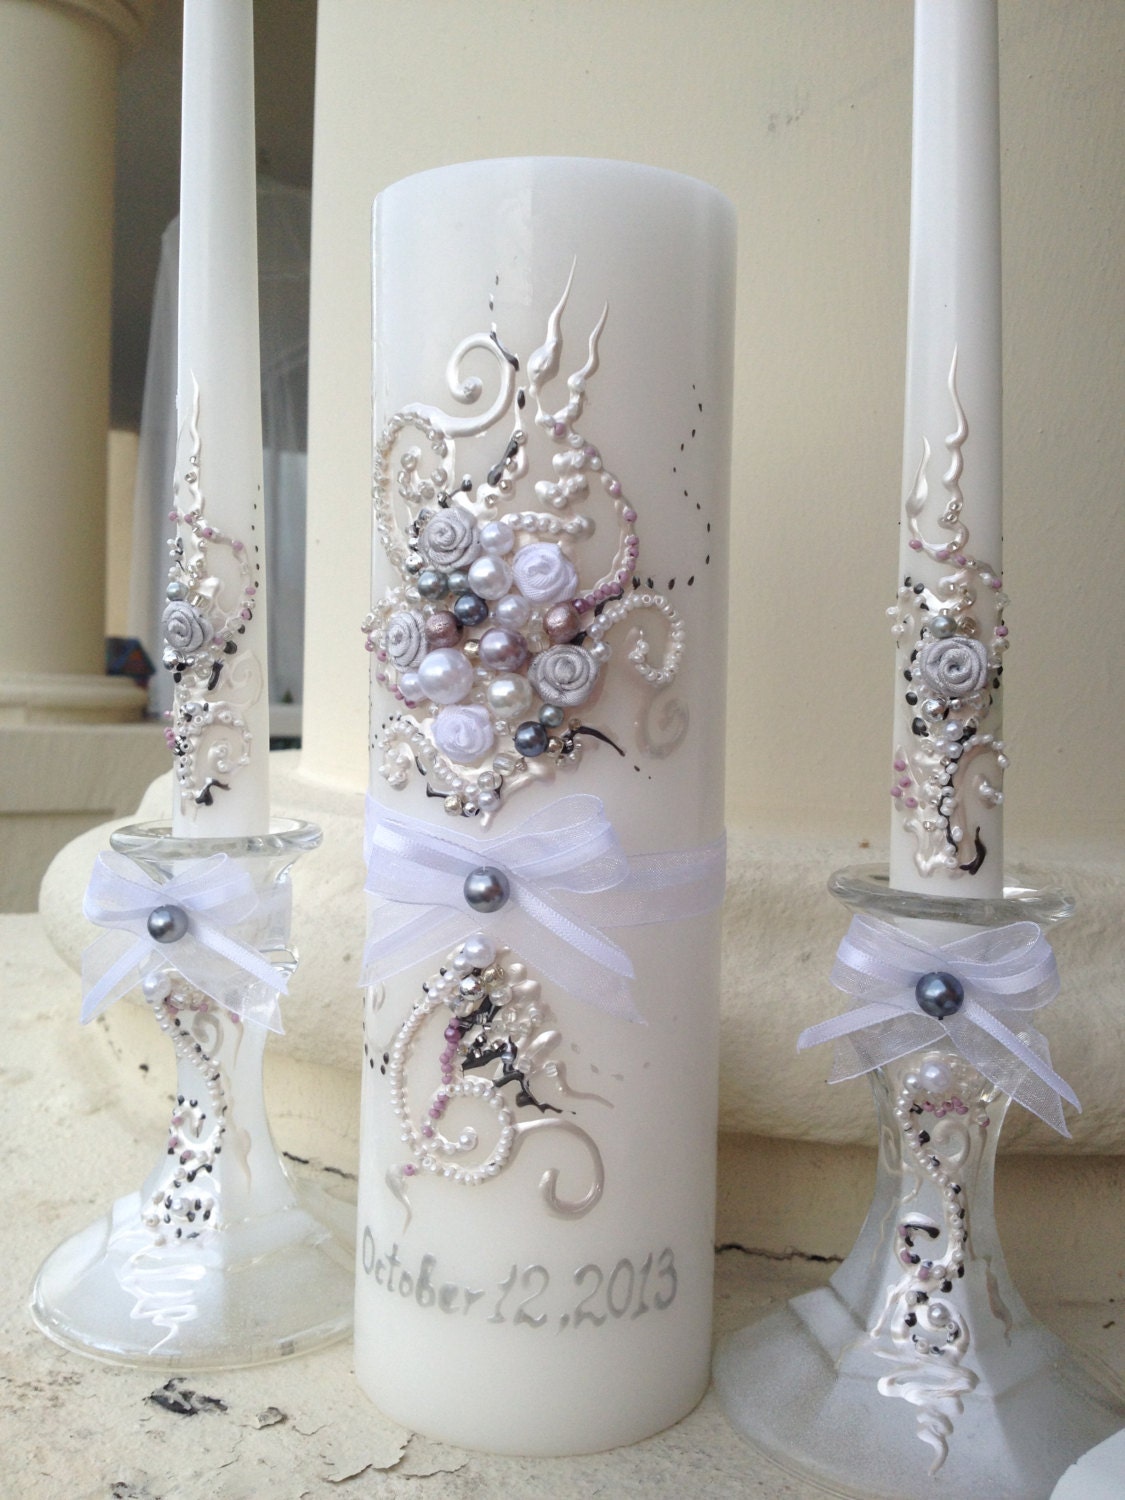 Beautiful wedding unity candle set - 3 candles and 2 candleholders - in white, lavender, dark grey and silver - PureBeautyArt